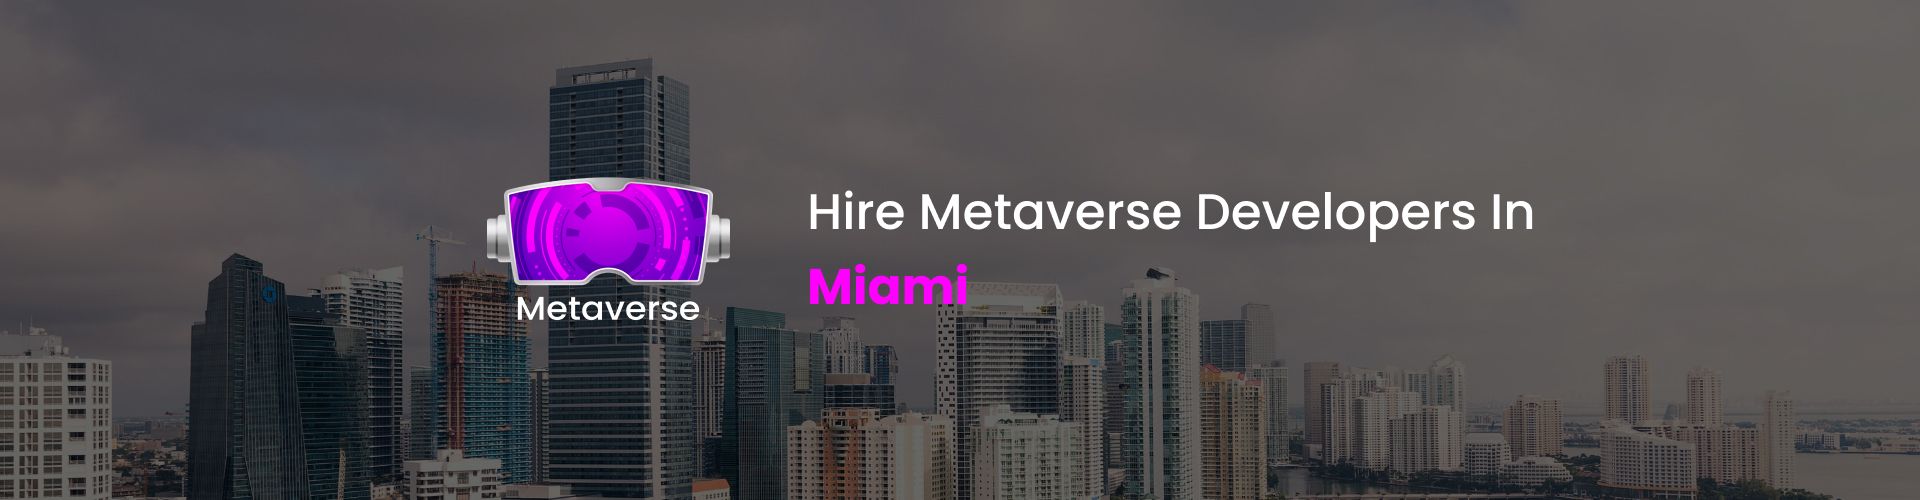 hire metaverse developers in miami